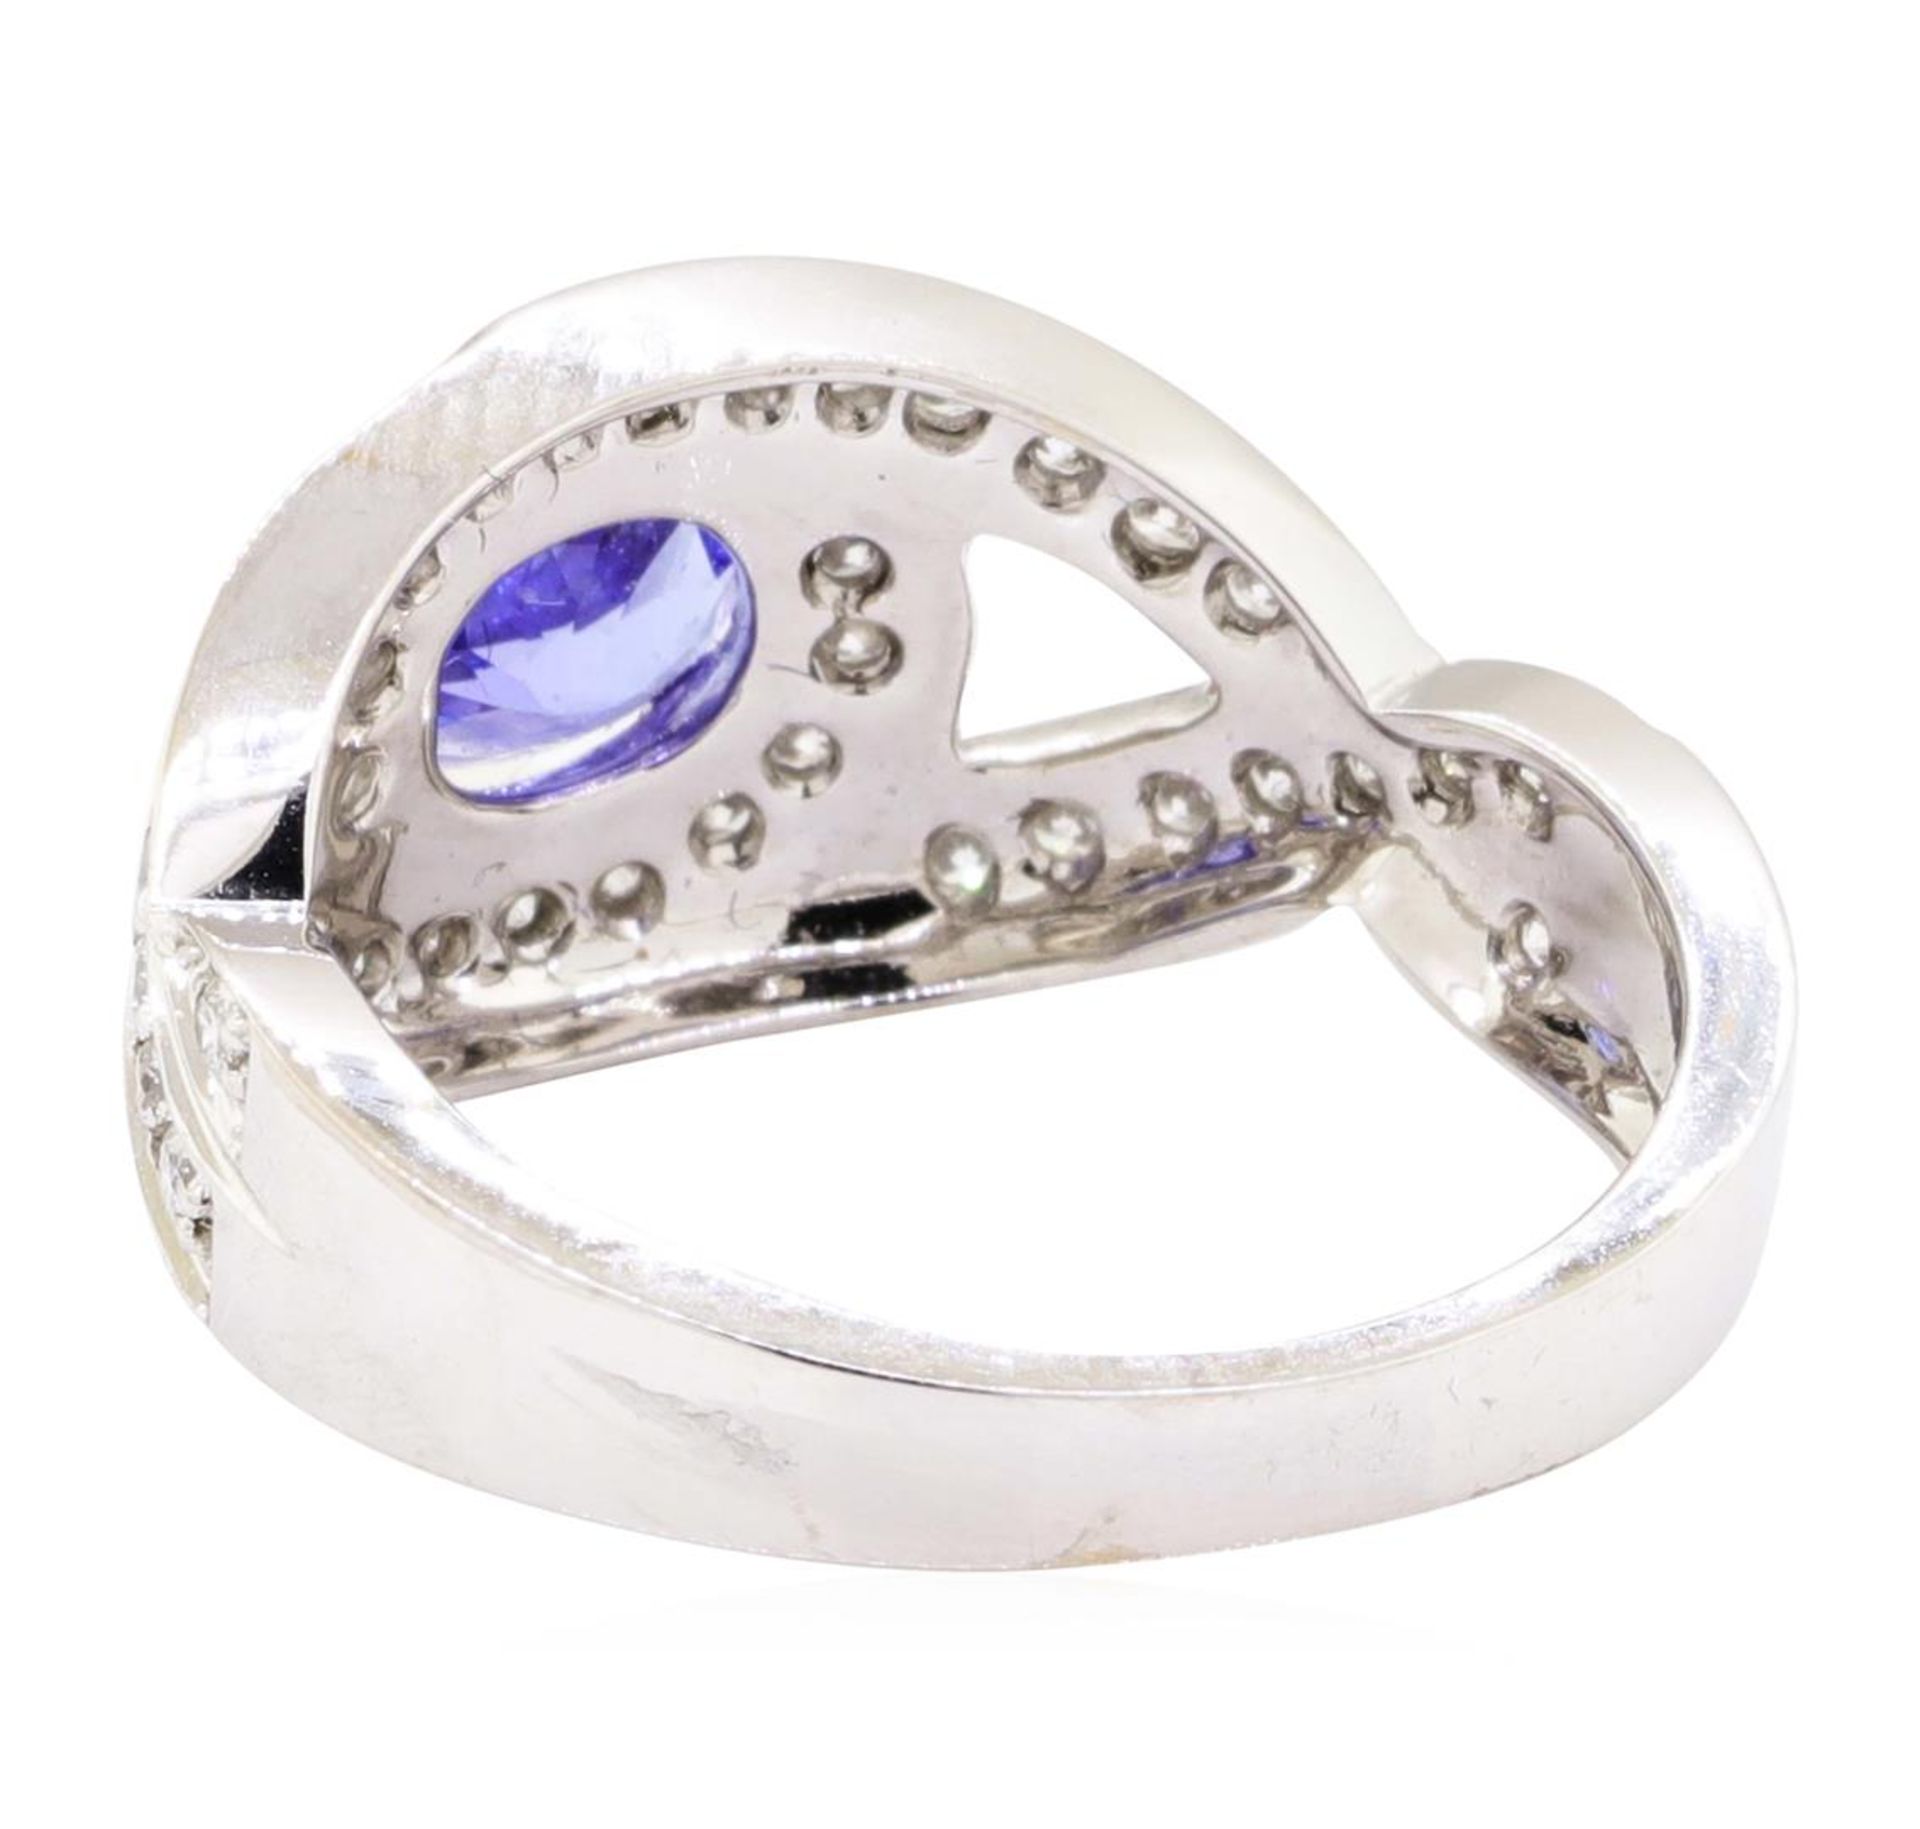 1.22 ctw Oval Mixed Tanzanite And Round Brilliant Cut Diamond Ring - 14KT White - Image 3 of 5